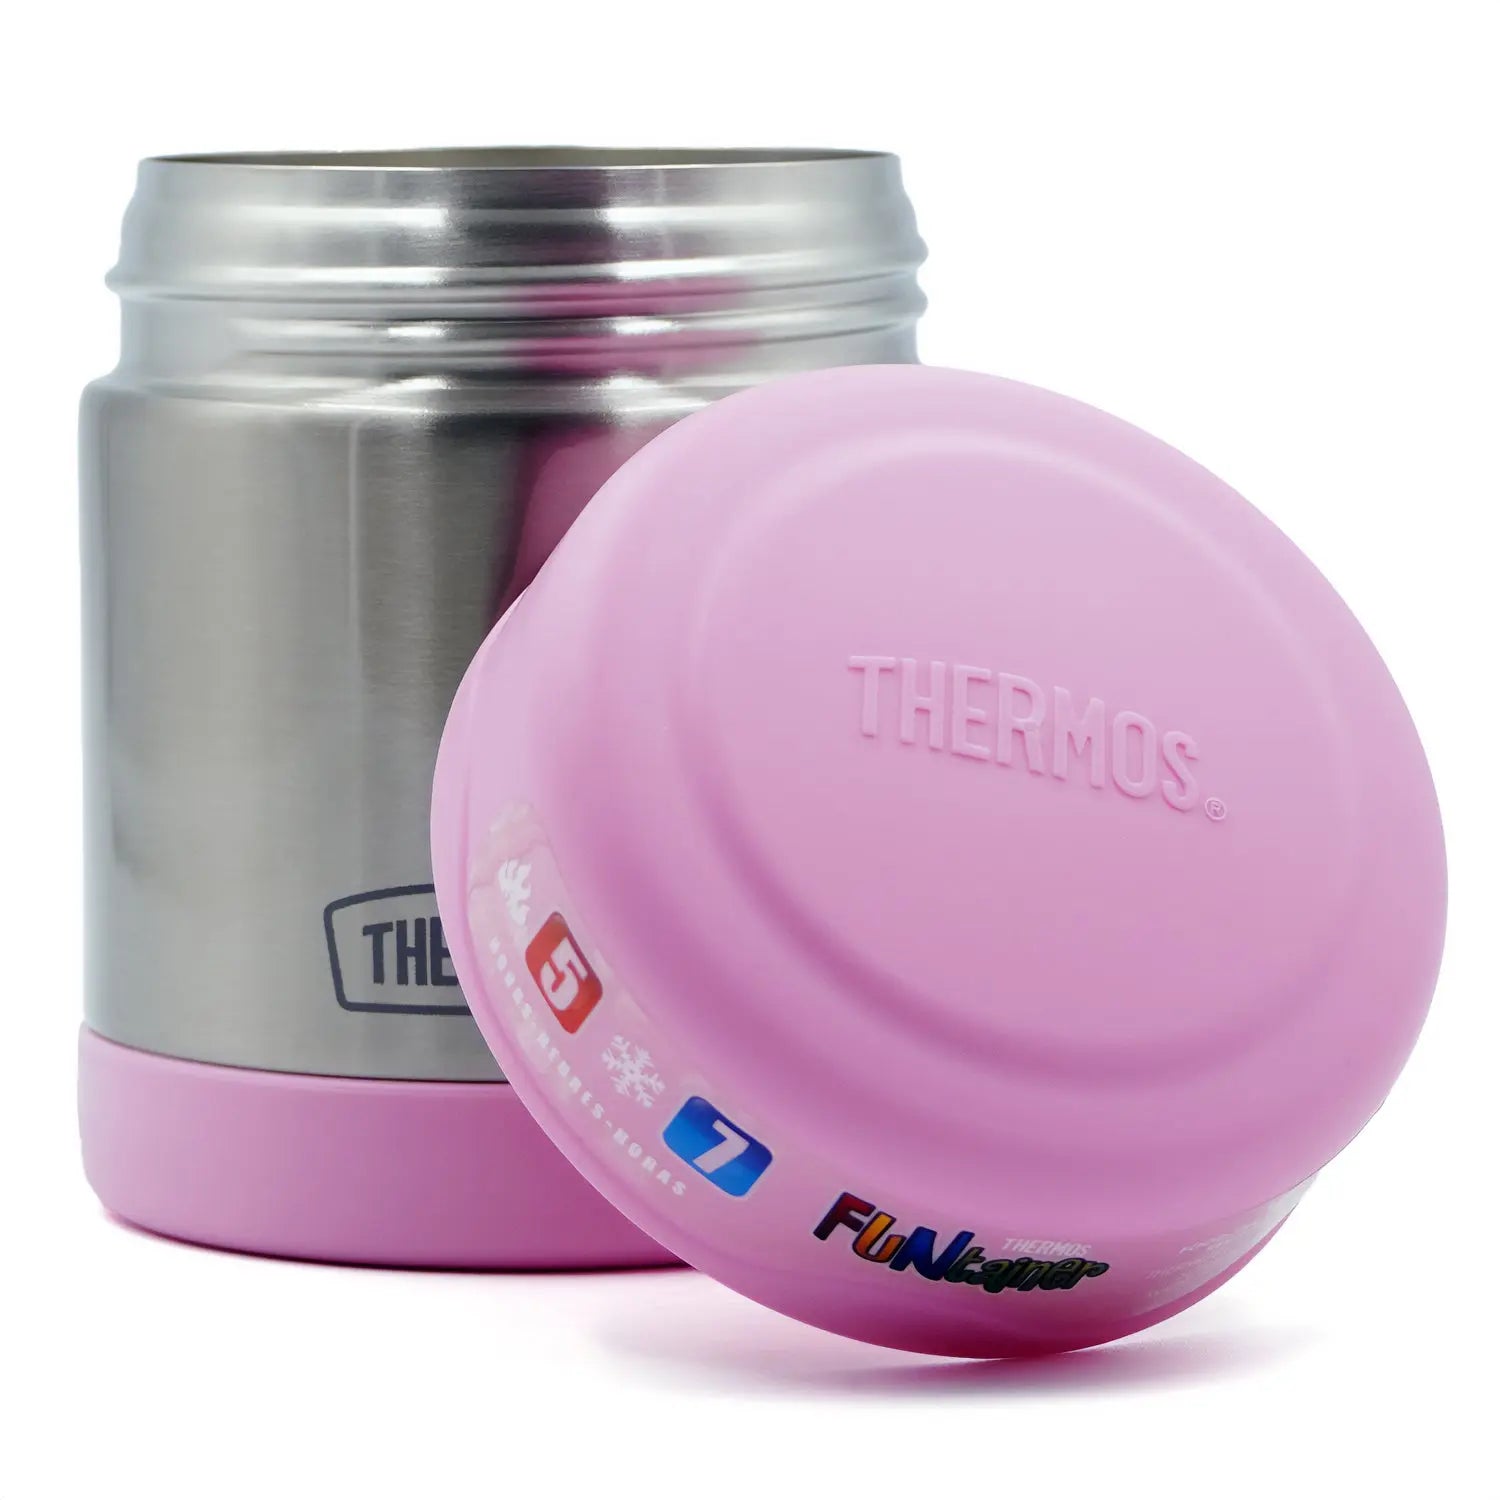 Thermos 10 oz. Insulated Stainless Steel Food Jar - Light Pink/Stainless Steel Thermos